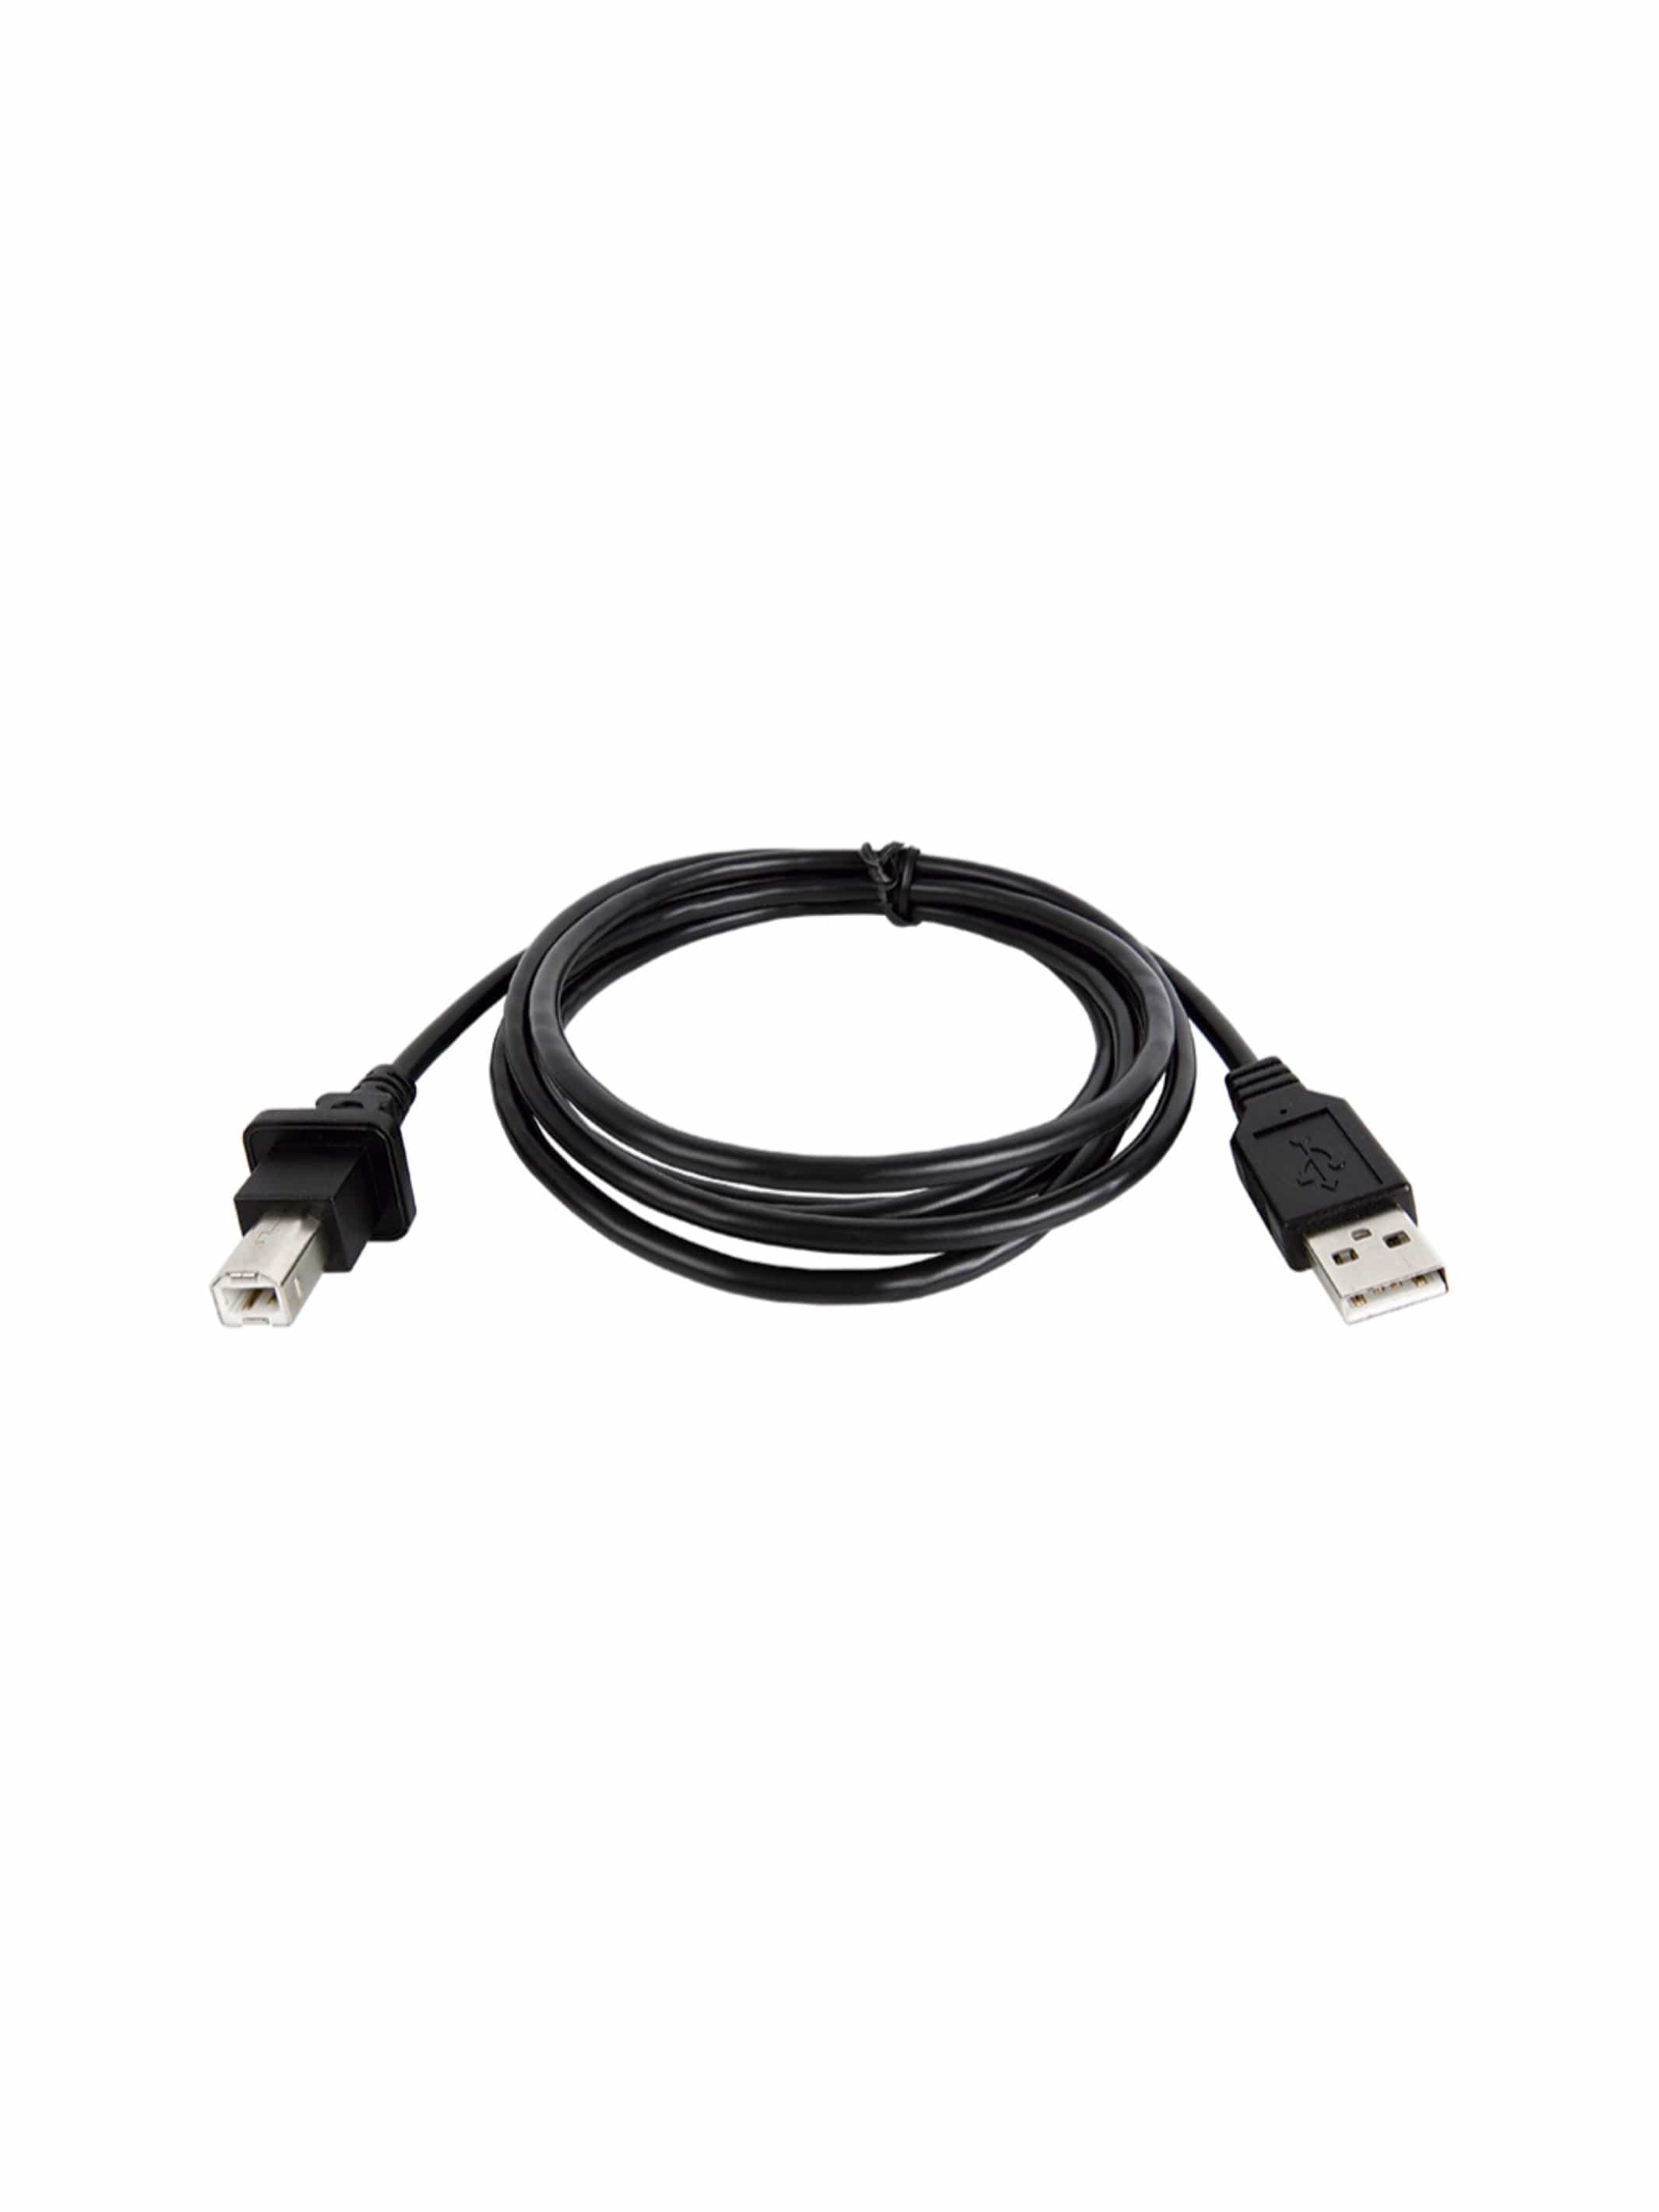 JDC107.9 USB Cable - Jaltest Deluxe Diagnostic Computer Kit for Commercial Vehicle, Construction &, Agriculture Equipment